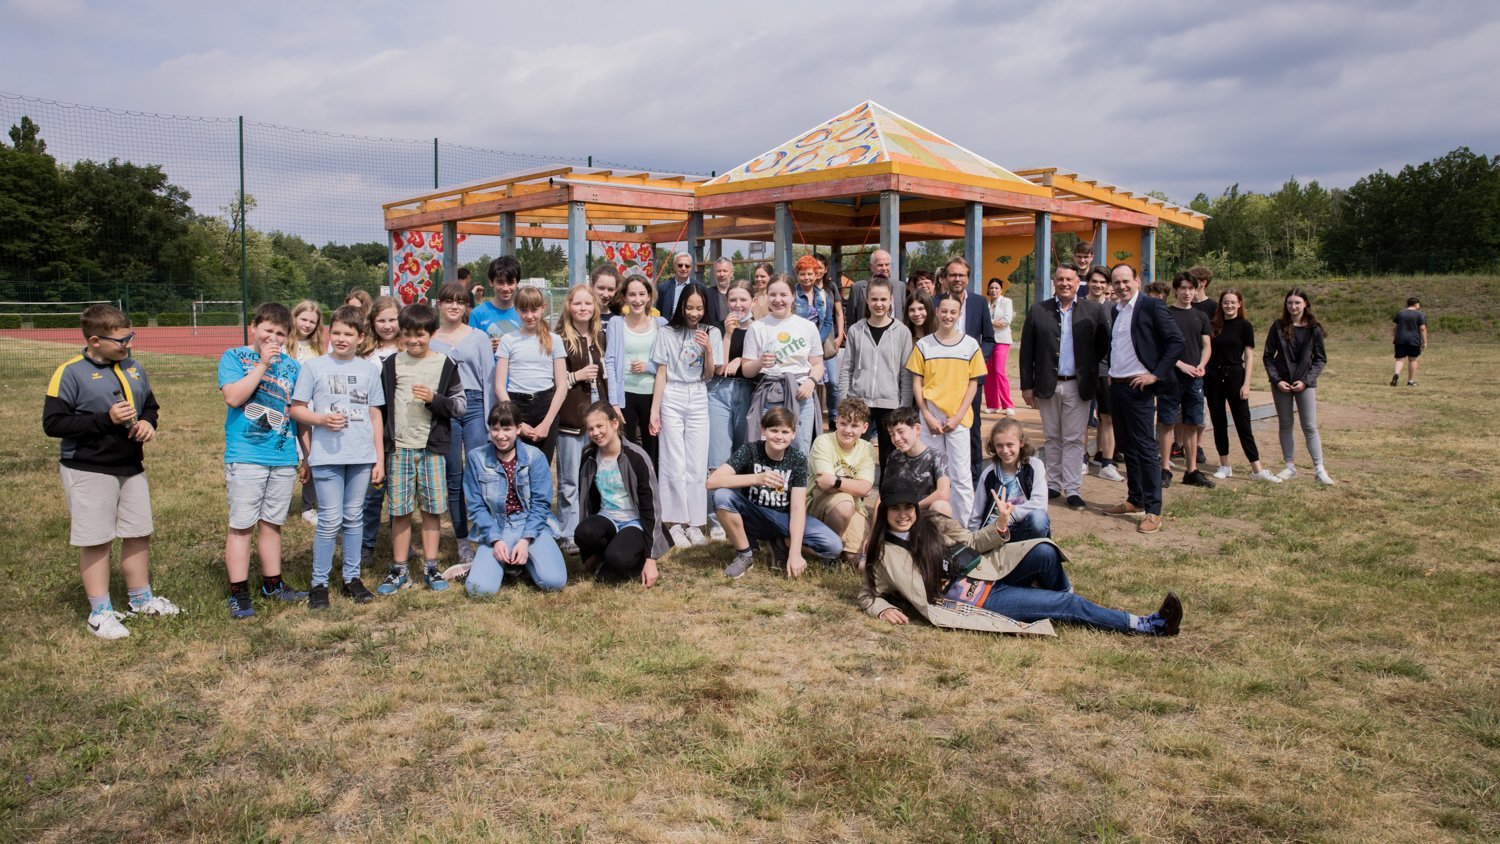 Group photo of the students of the Seecampus Niederlausitz with artist Sol Calero in front of Casa Isadora in Schwarzheide